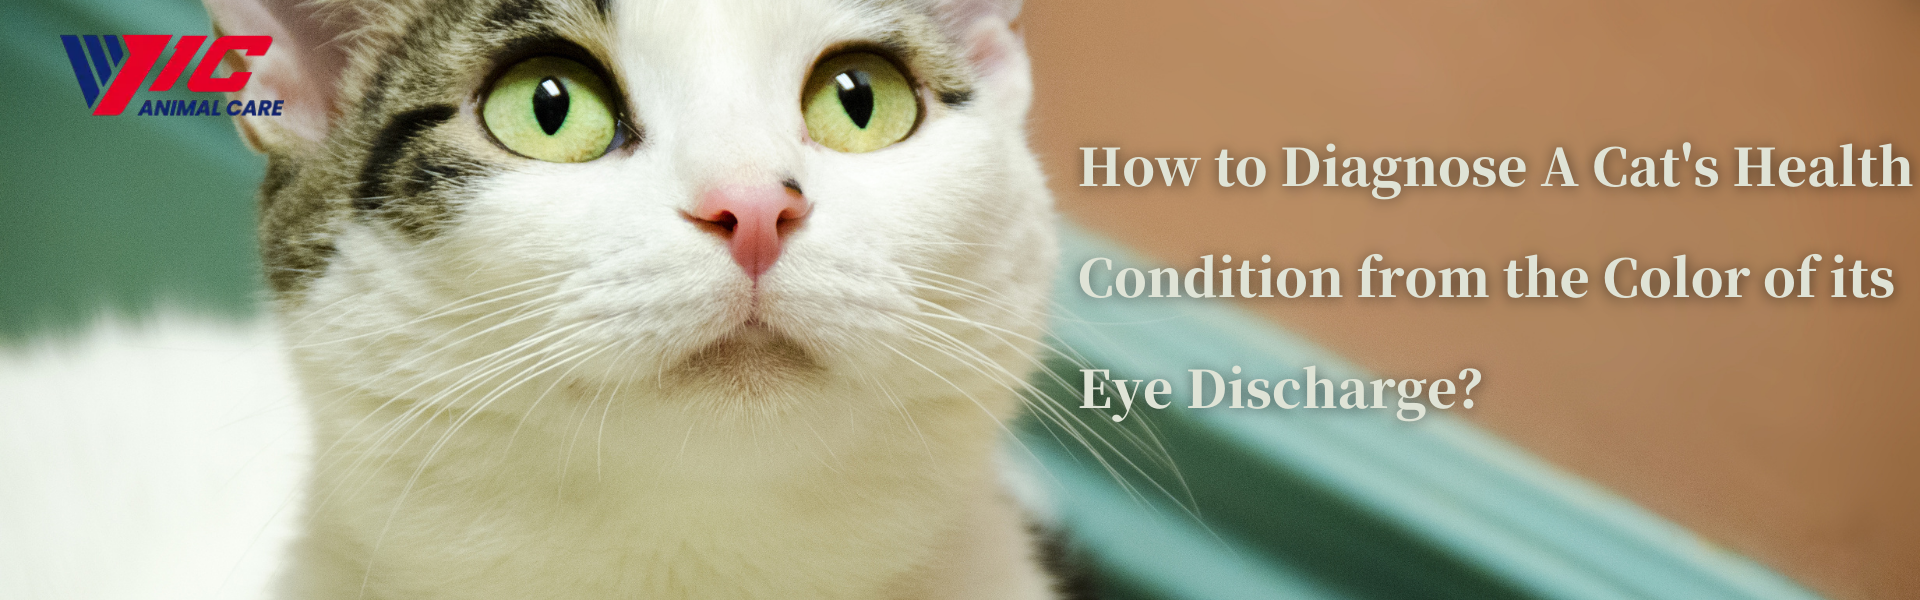 How to Diagnose A Cat’s Health Condition from the Color of its Eye Discharge?